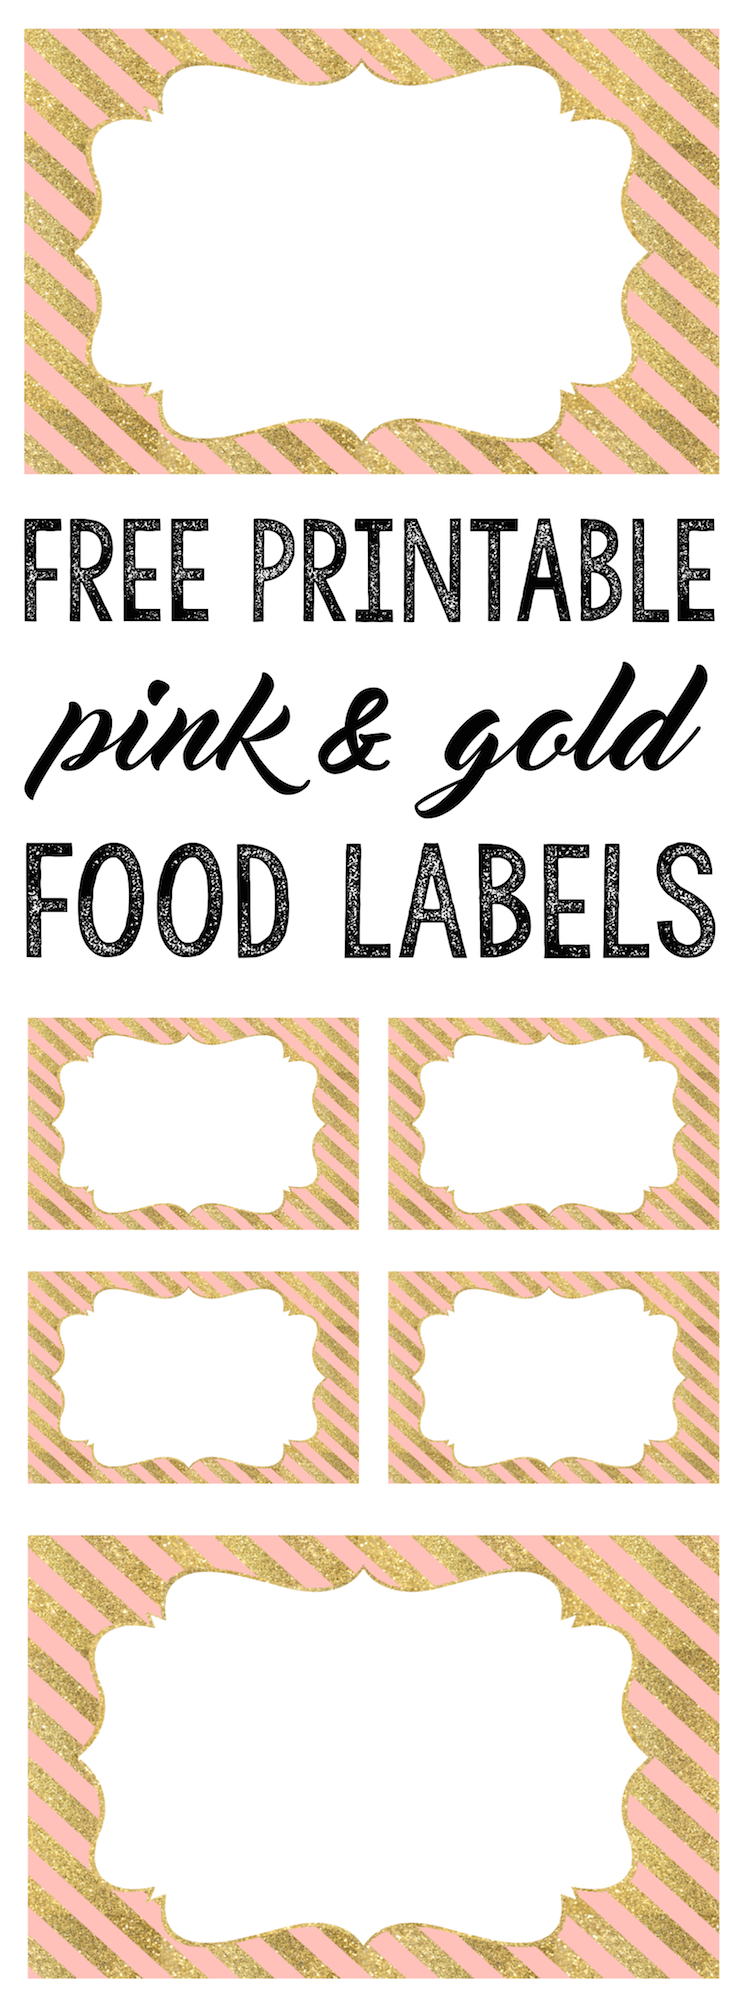 Pink and Gold Food Labels free printable. Print these food labels for your pink and gold baby shower, birthday party, bridal shower or whatever even you choose. 